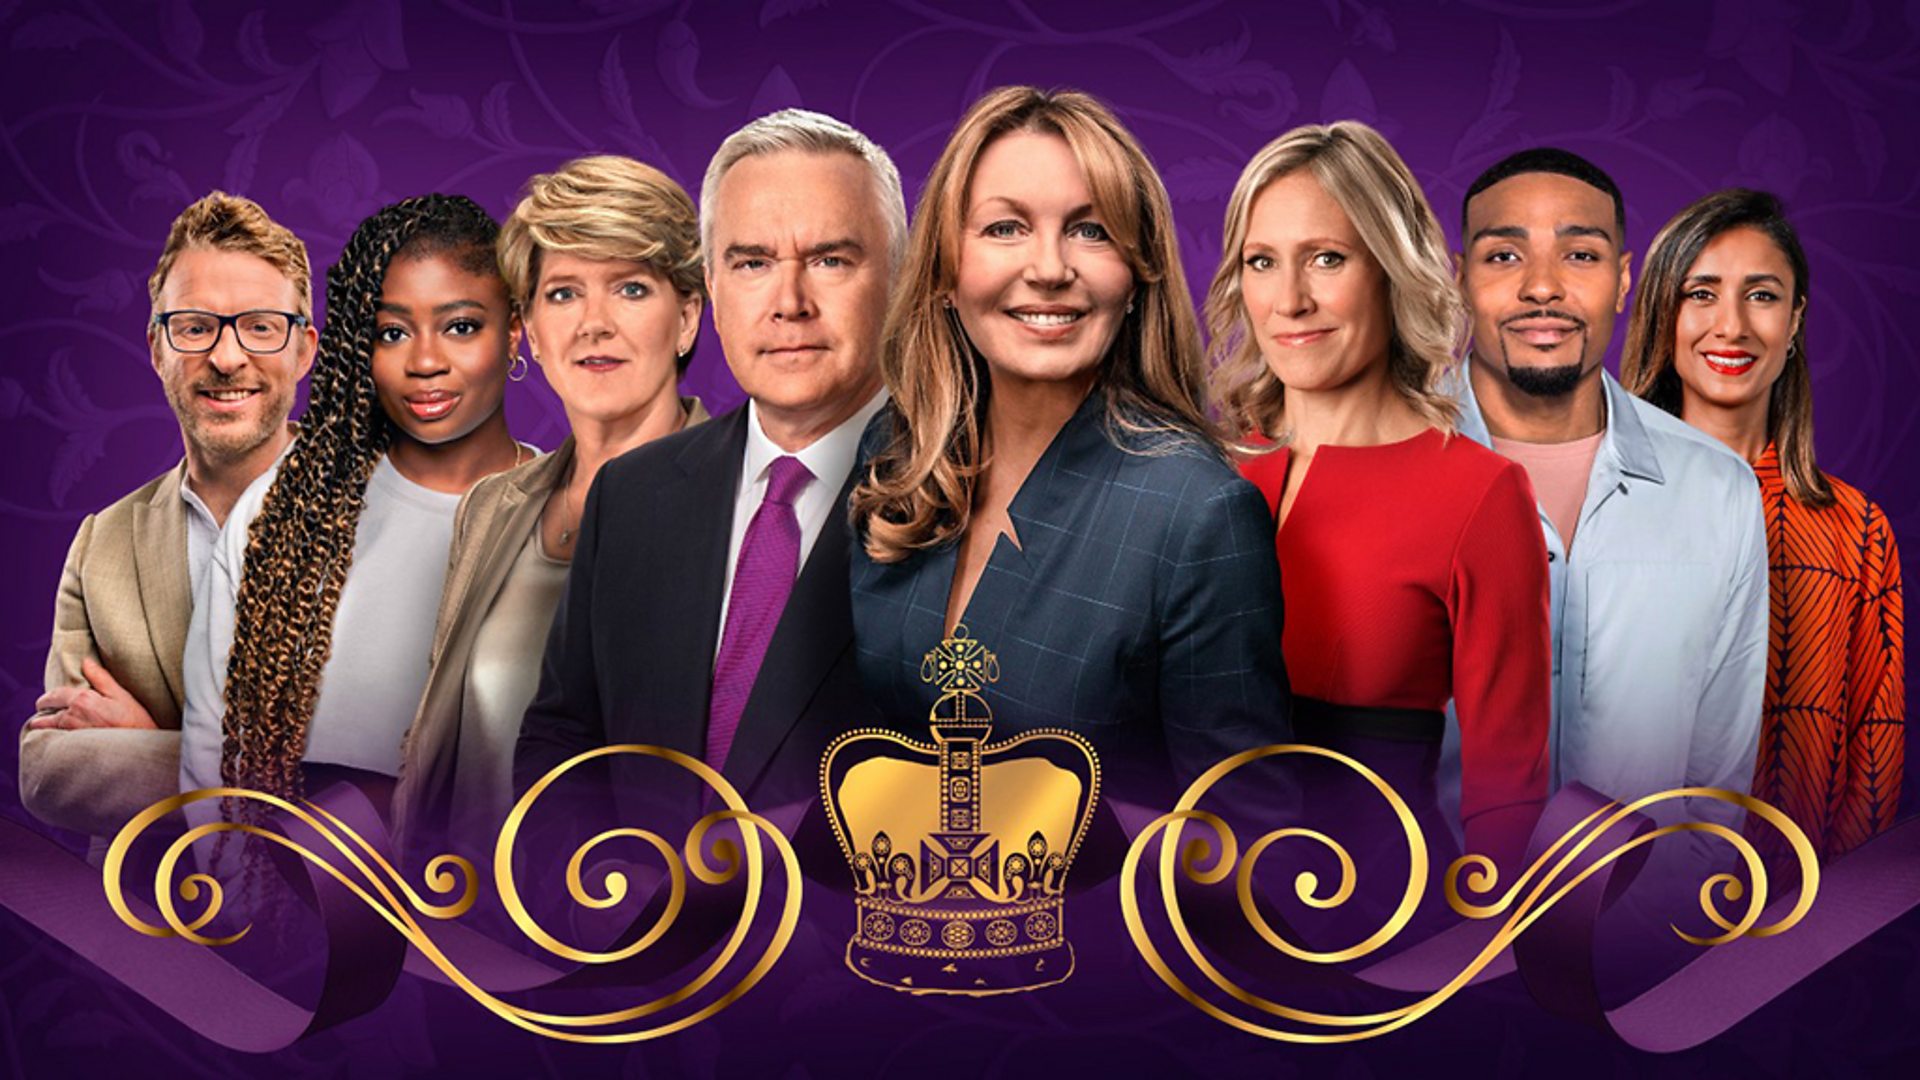 BBC unveils special coverage and programming to mark Coronation of His